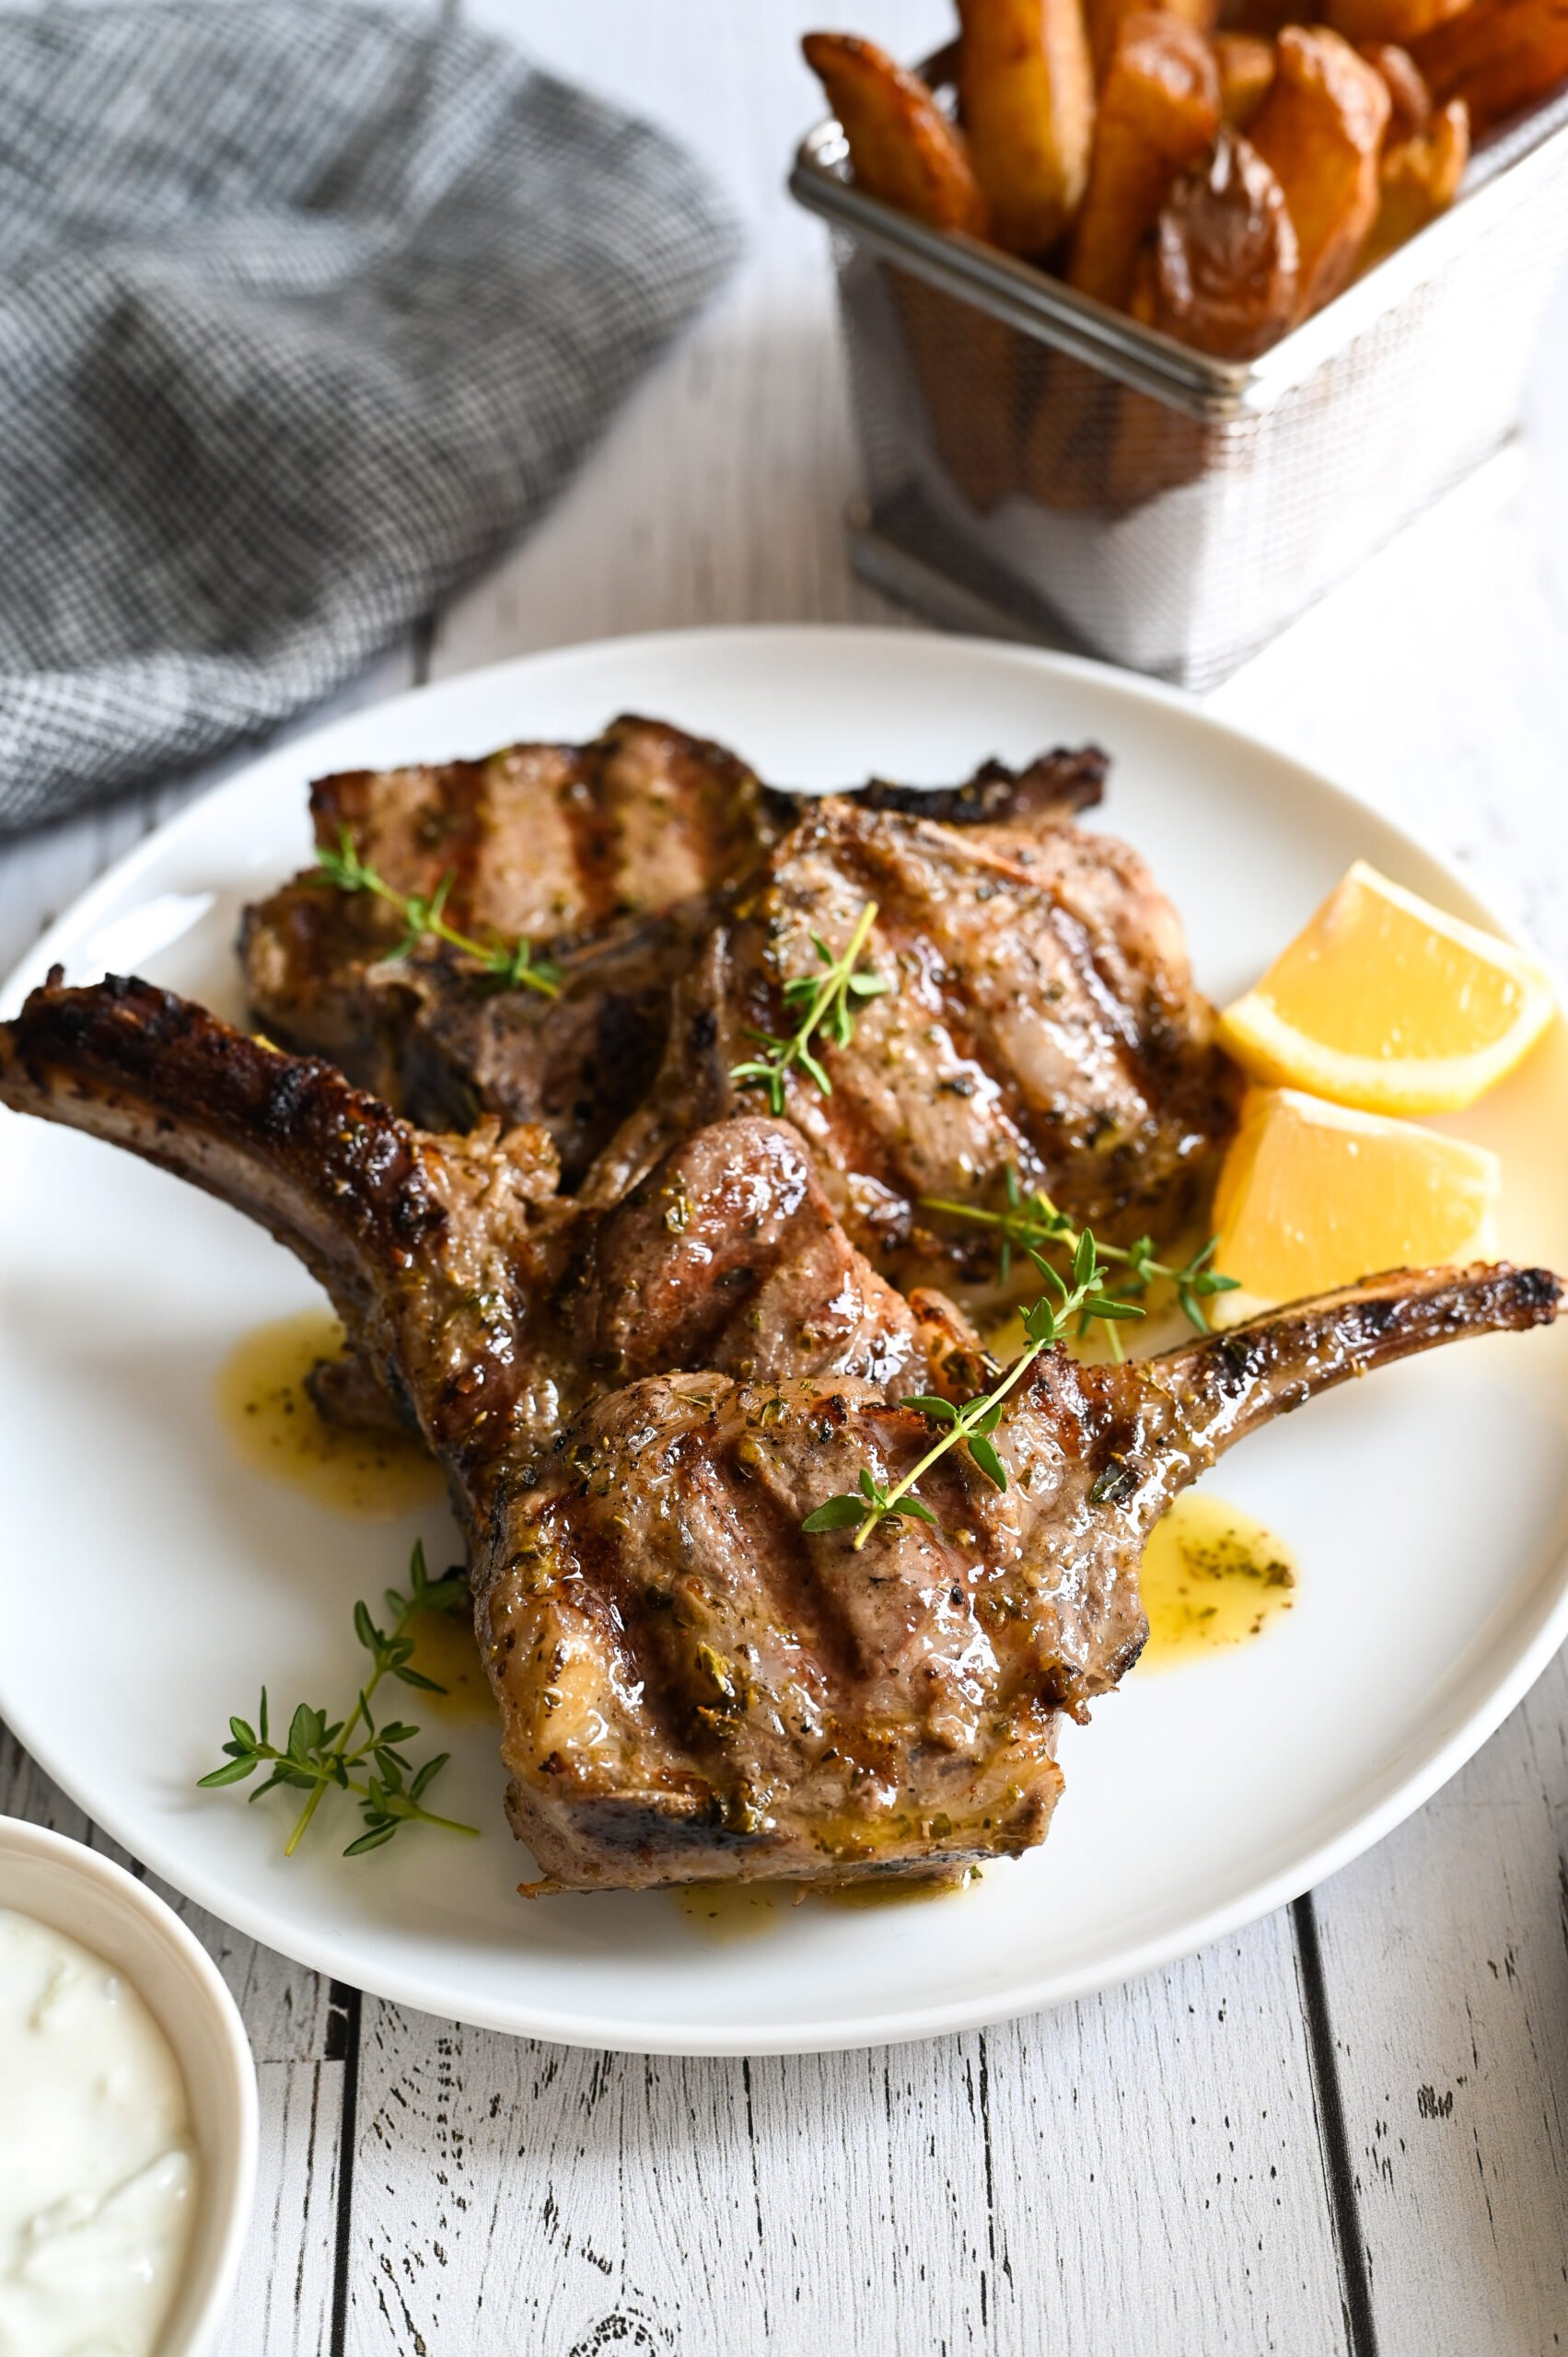 Grilled lamb chops - Mia Kouppa, Traditional Greek recipes and more